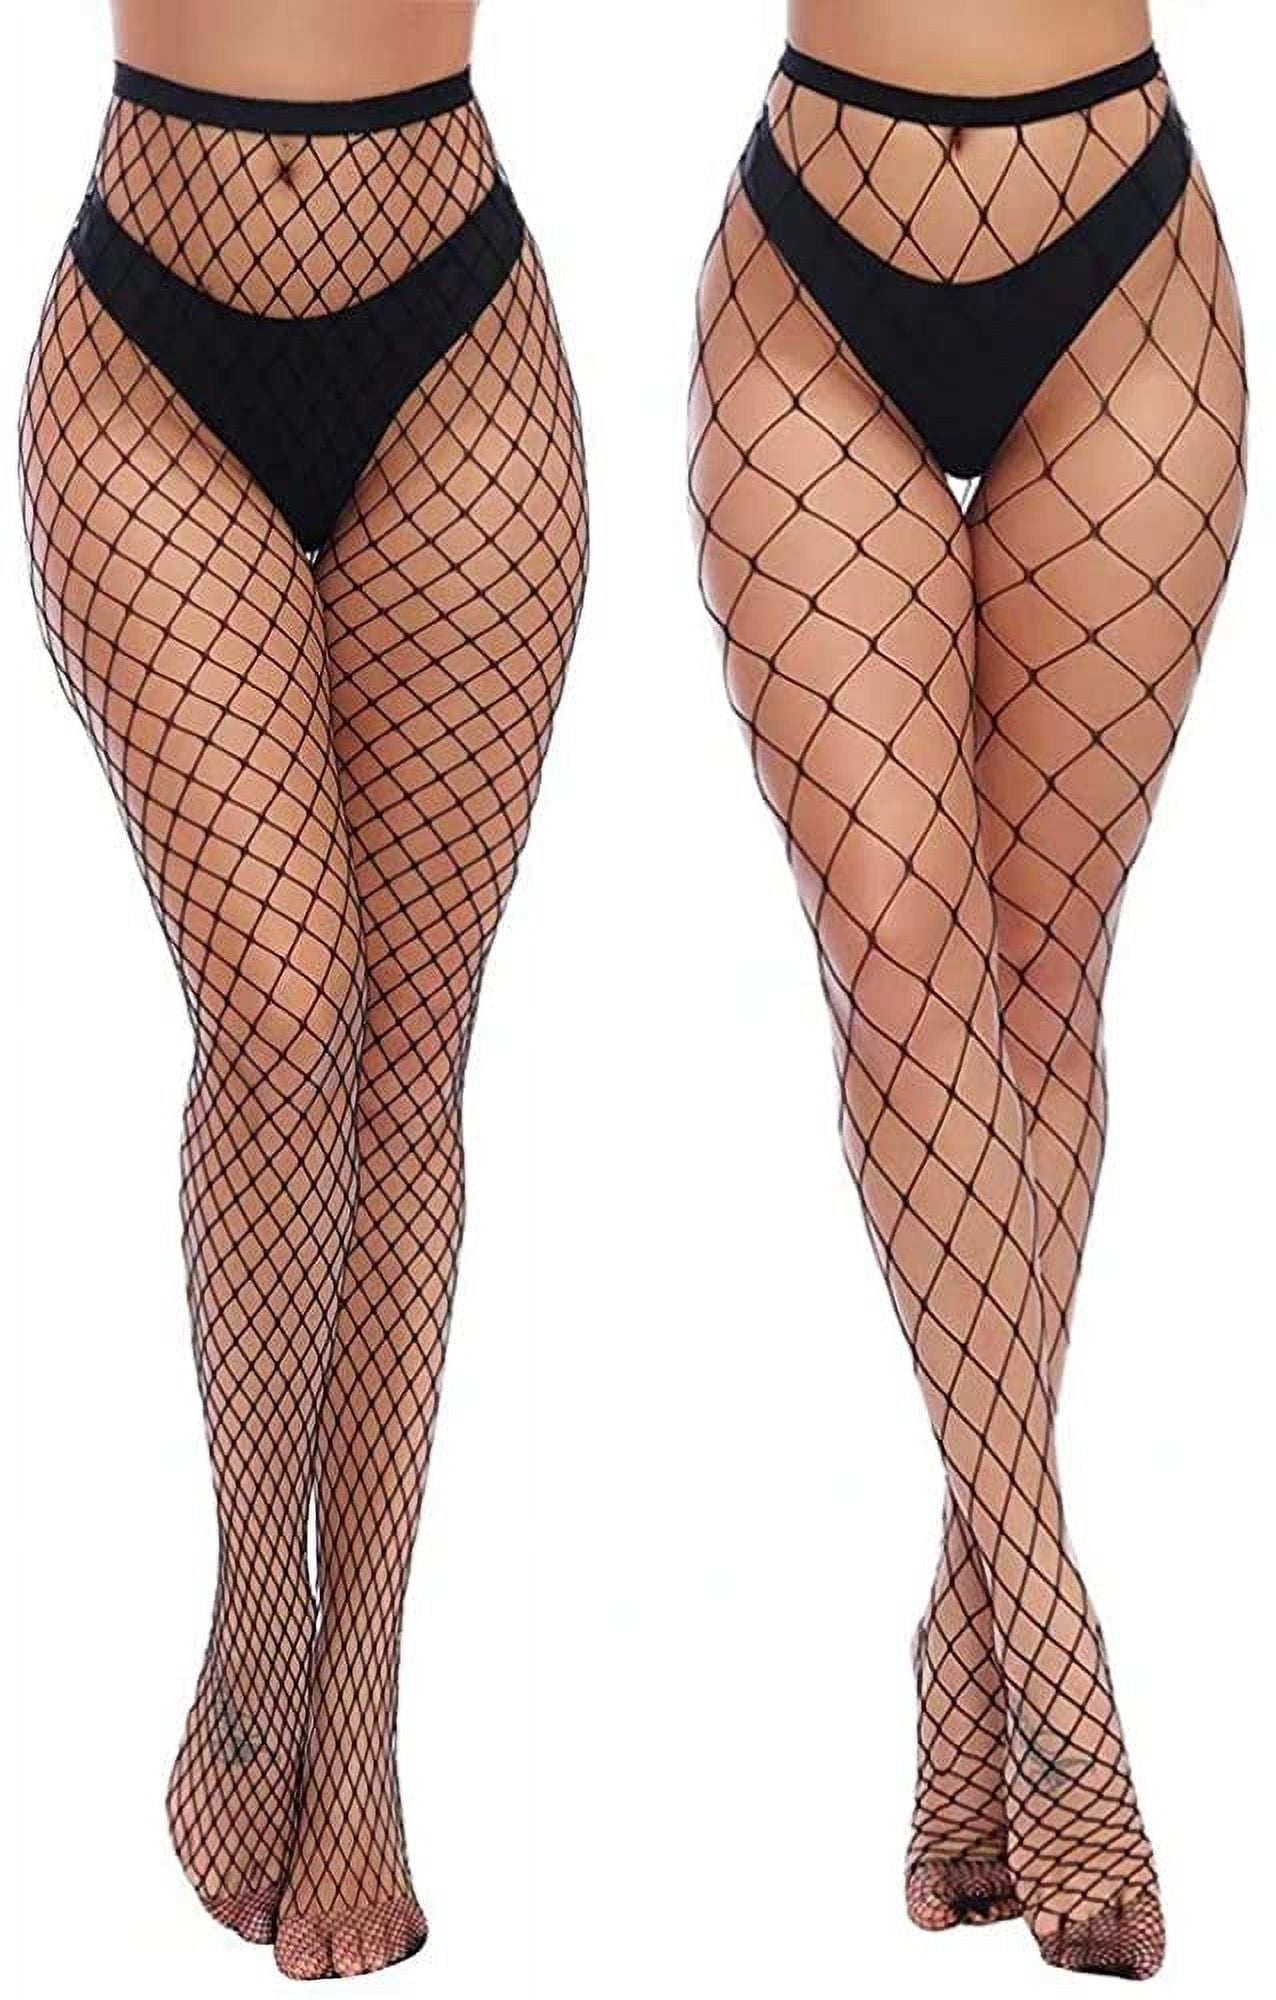 Womens High Waist Tights Fishnet Stockings Thigh High  Pantyhose,Black-g5,One Size 